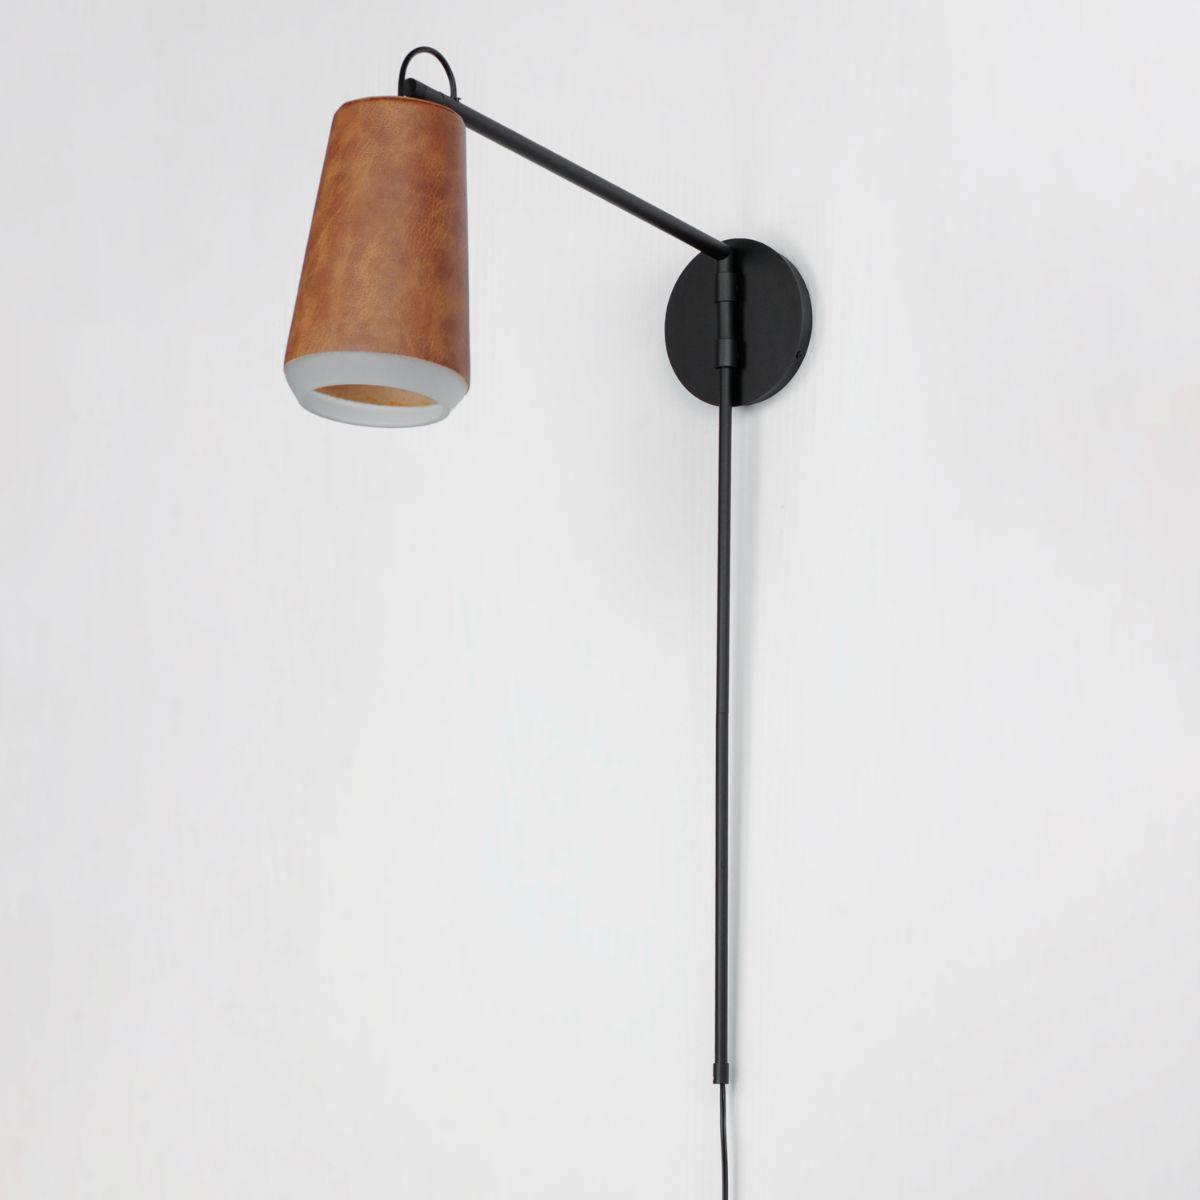 SCOUT 32 in. LED Plug In Swing Arm Wall Sconce Weathered Wood & Tan Leather